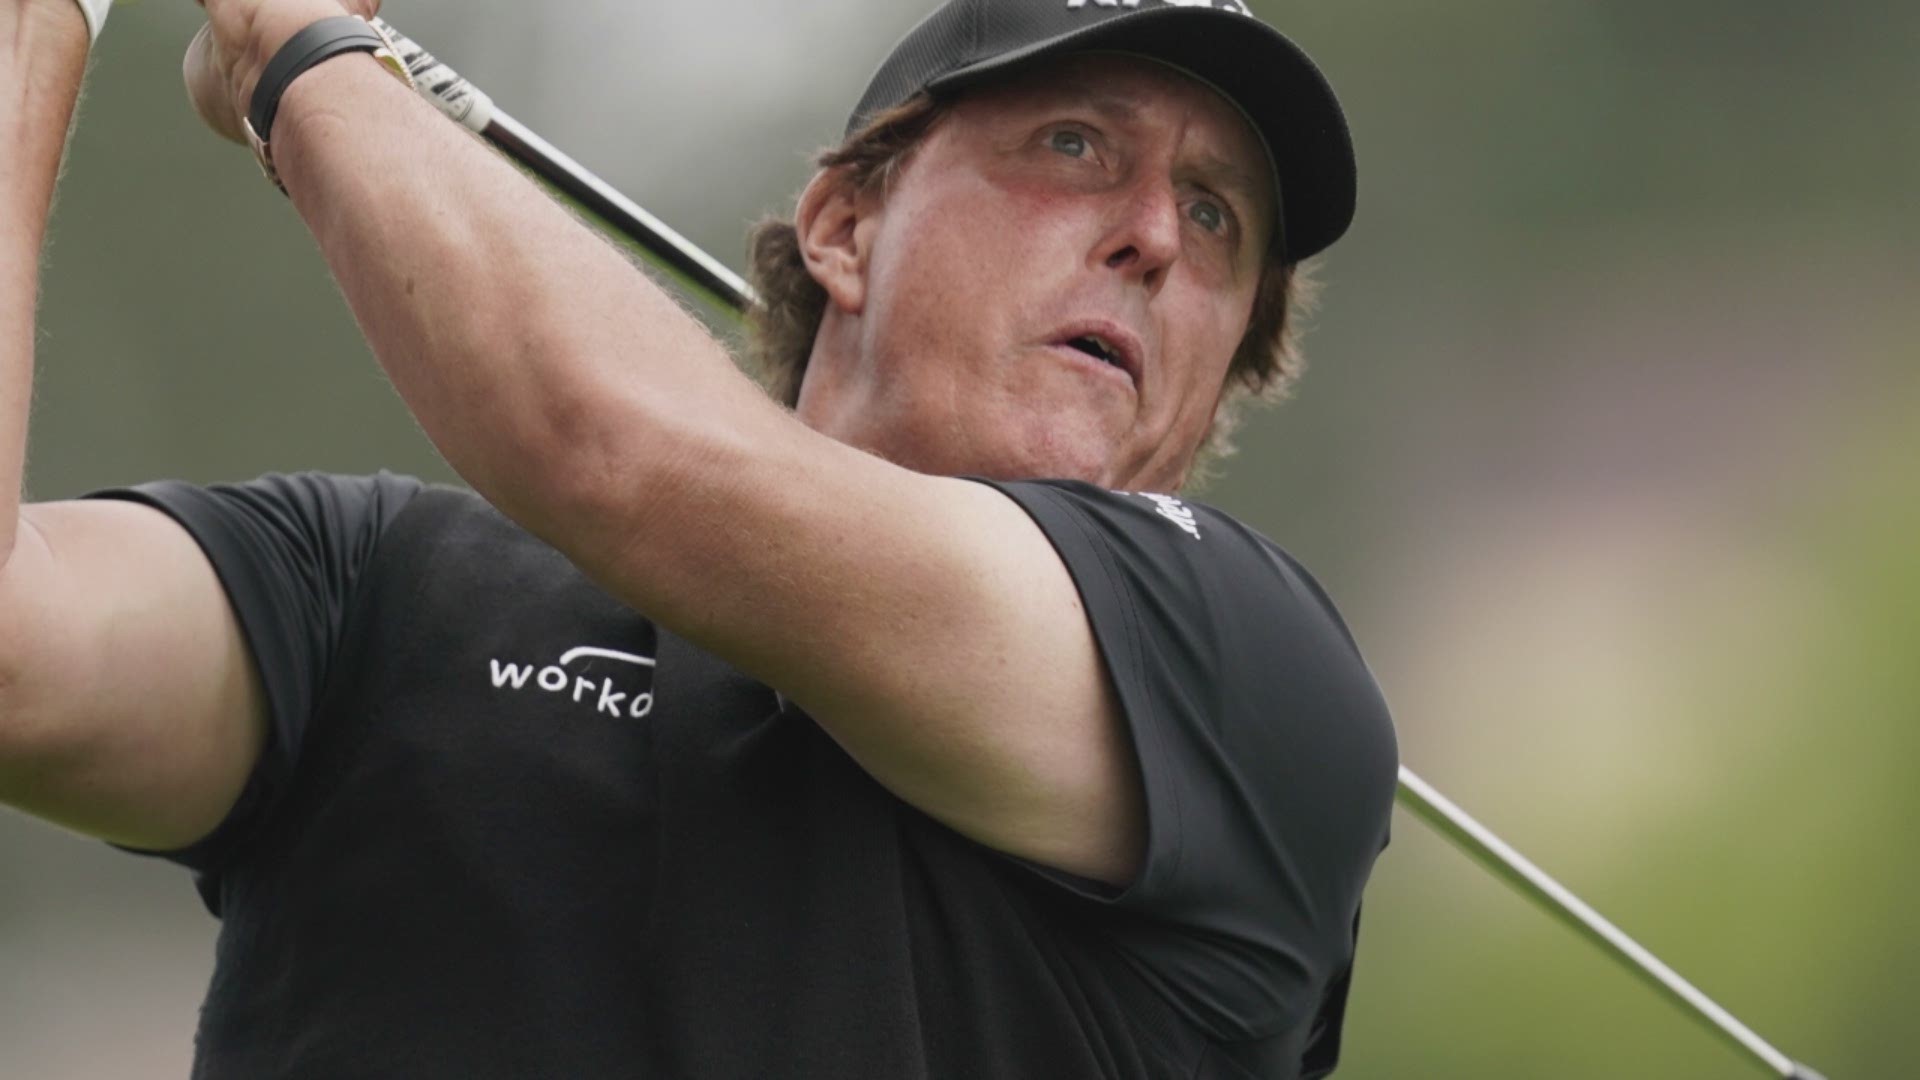 PGA golfer Phil Mickelson recently went on a six-day fast, refraining from eating anything in order to heal, he said. During that six-day period, Mickelson lost 15 pounds before the British Open Tournament.